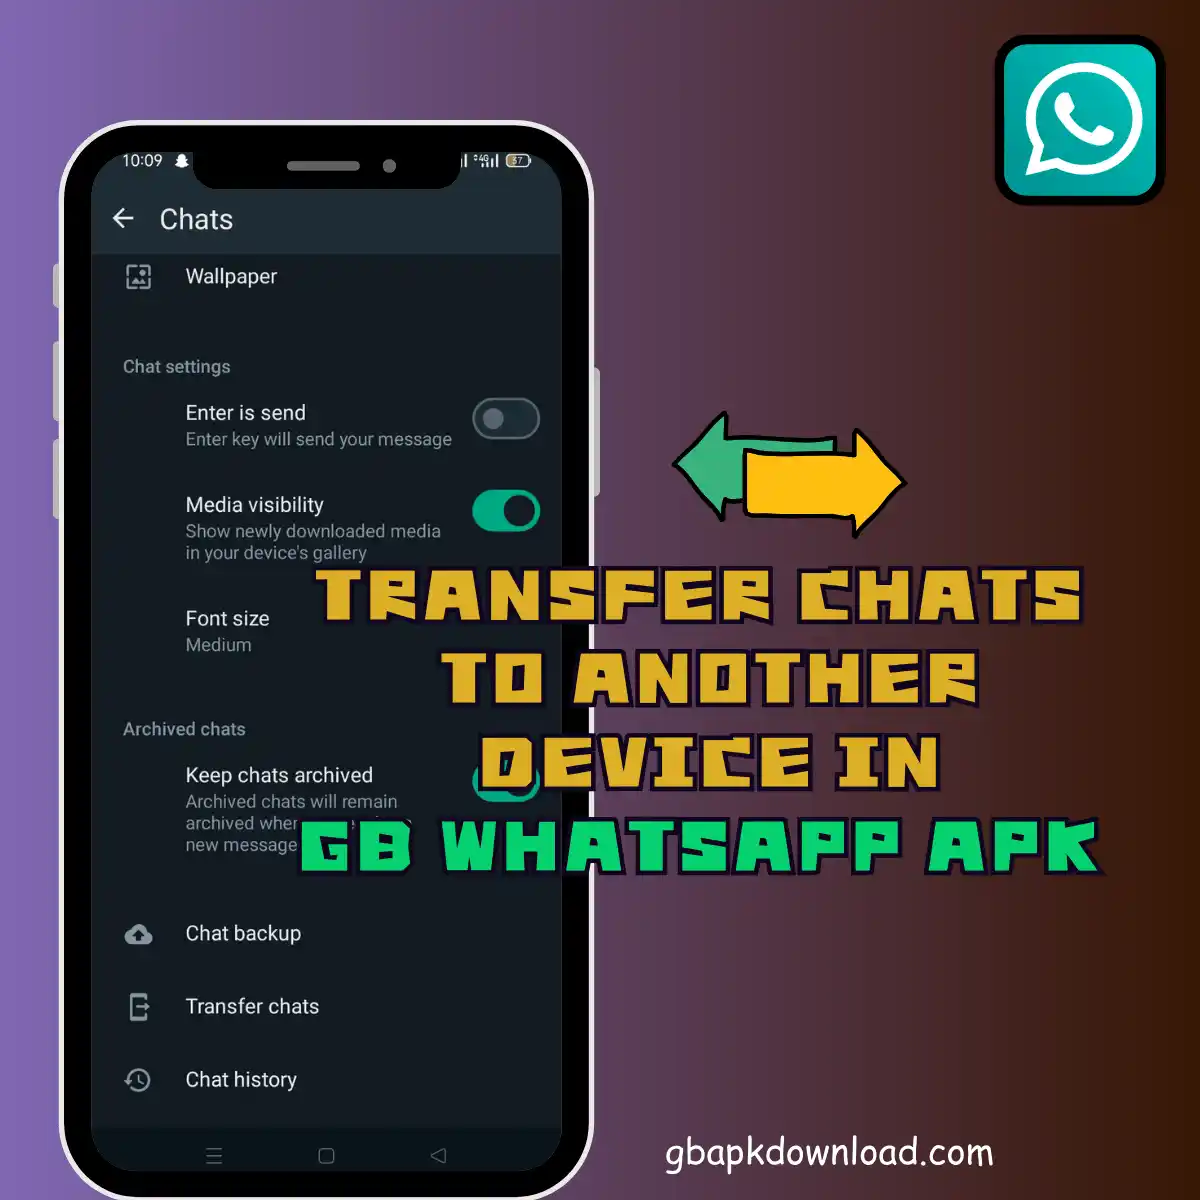 Transfer Chats to another device in GB WhatsApp From Google Drive